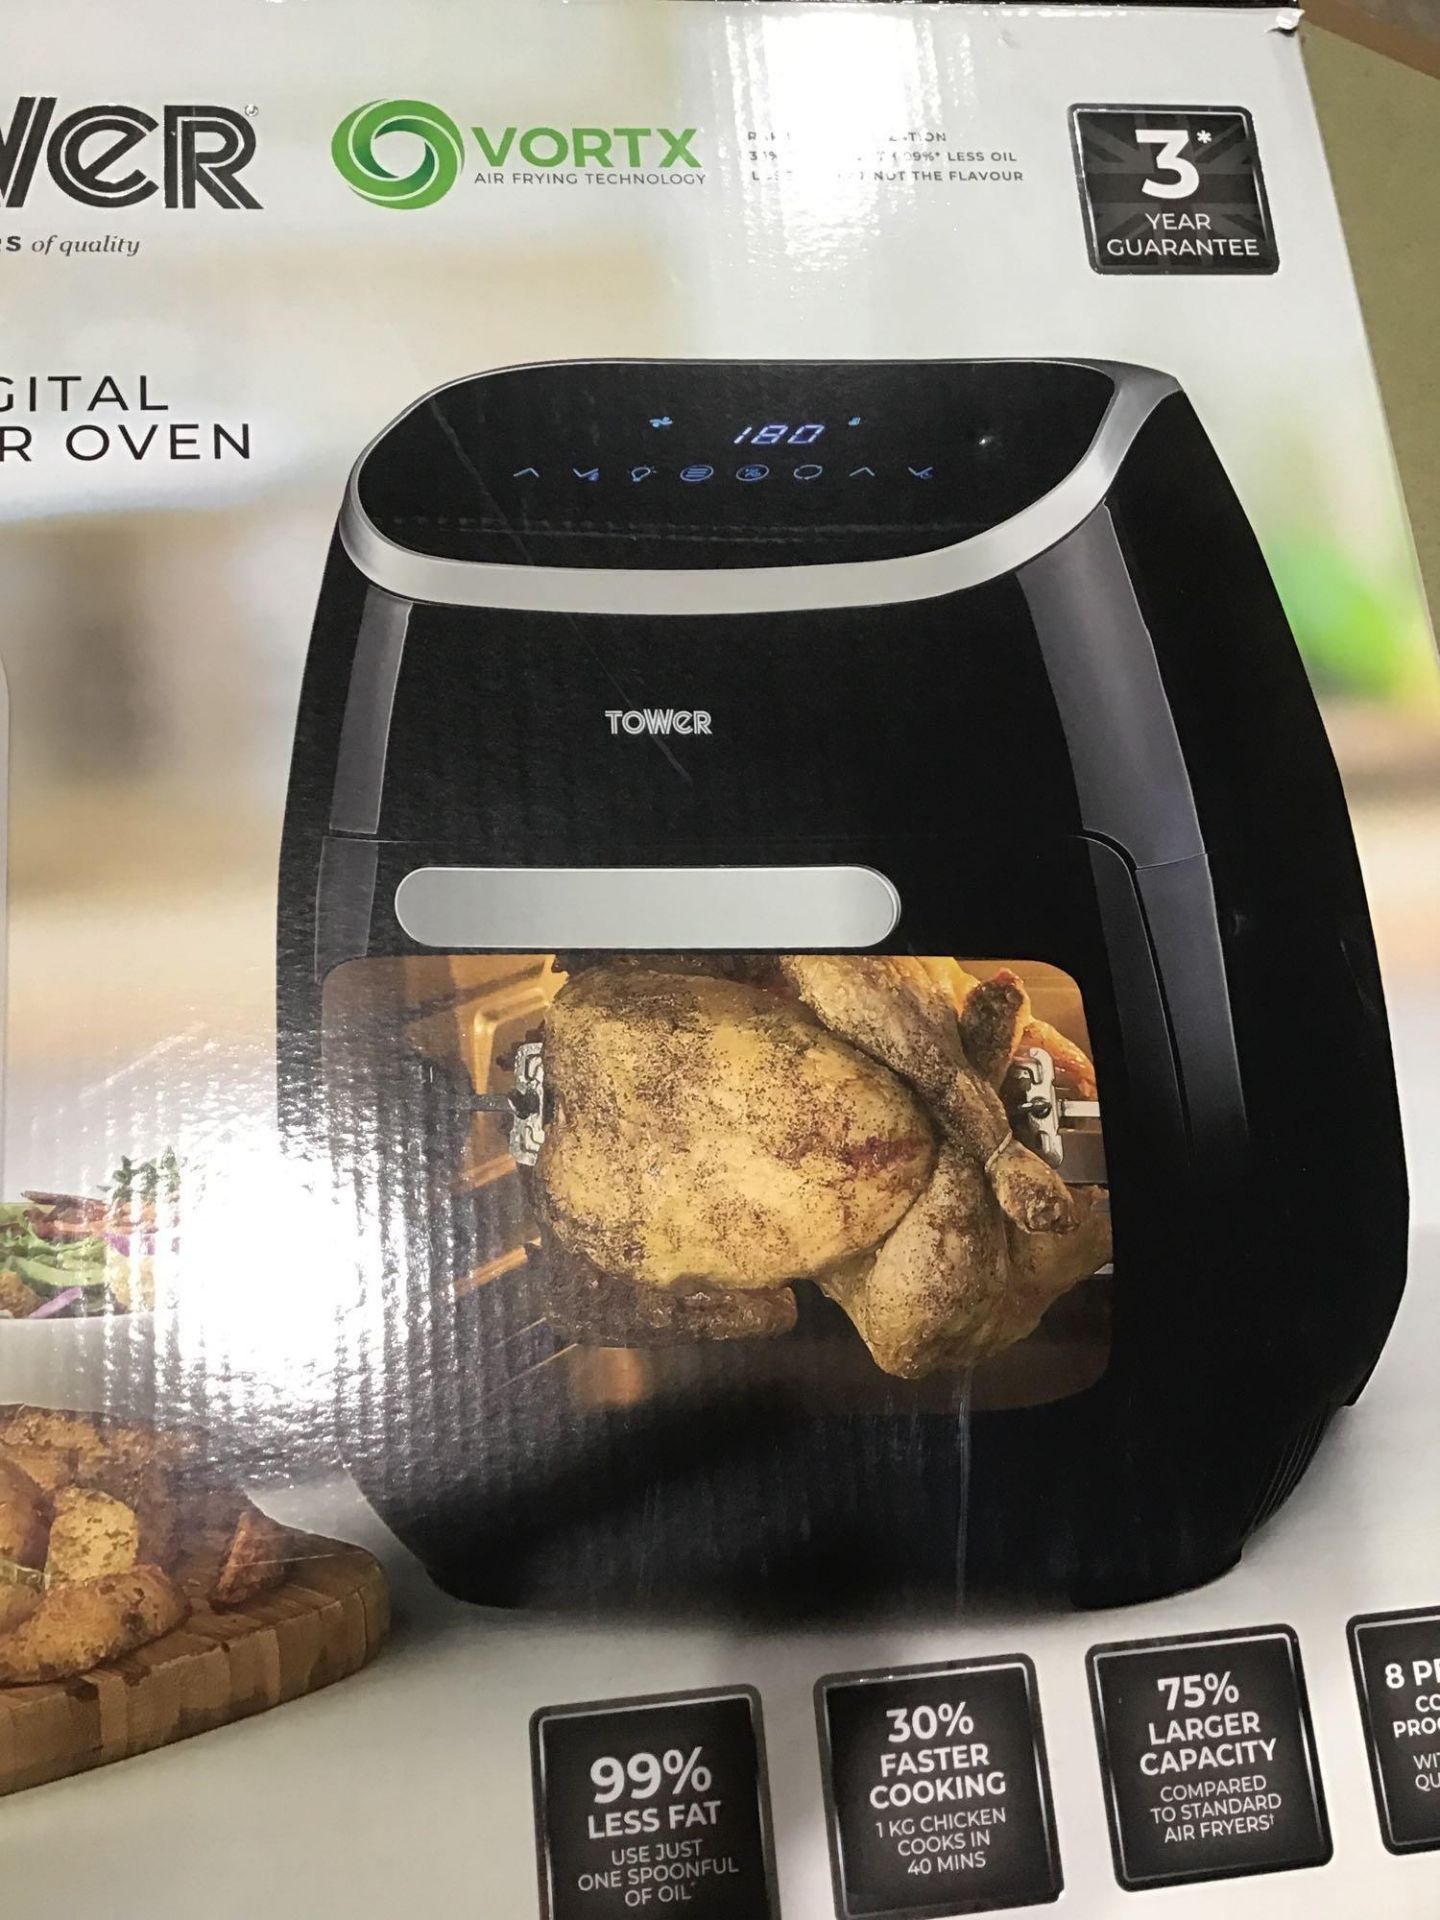 Tower T17039 Digital Air Fryer Oven, 11 Litre, Digital Display with 60 Minute Timer £86.99 RRP - Image 3 of 4